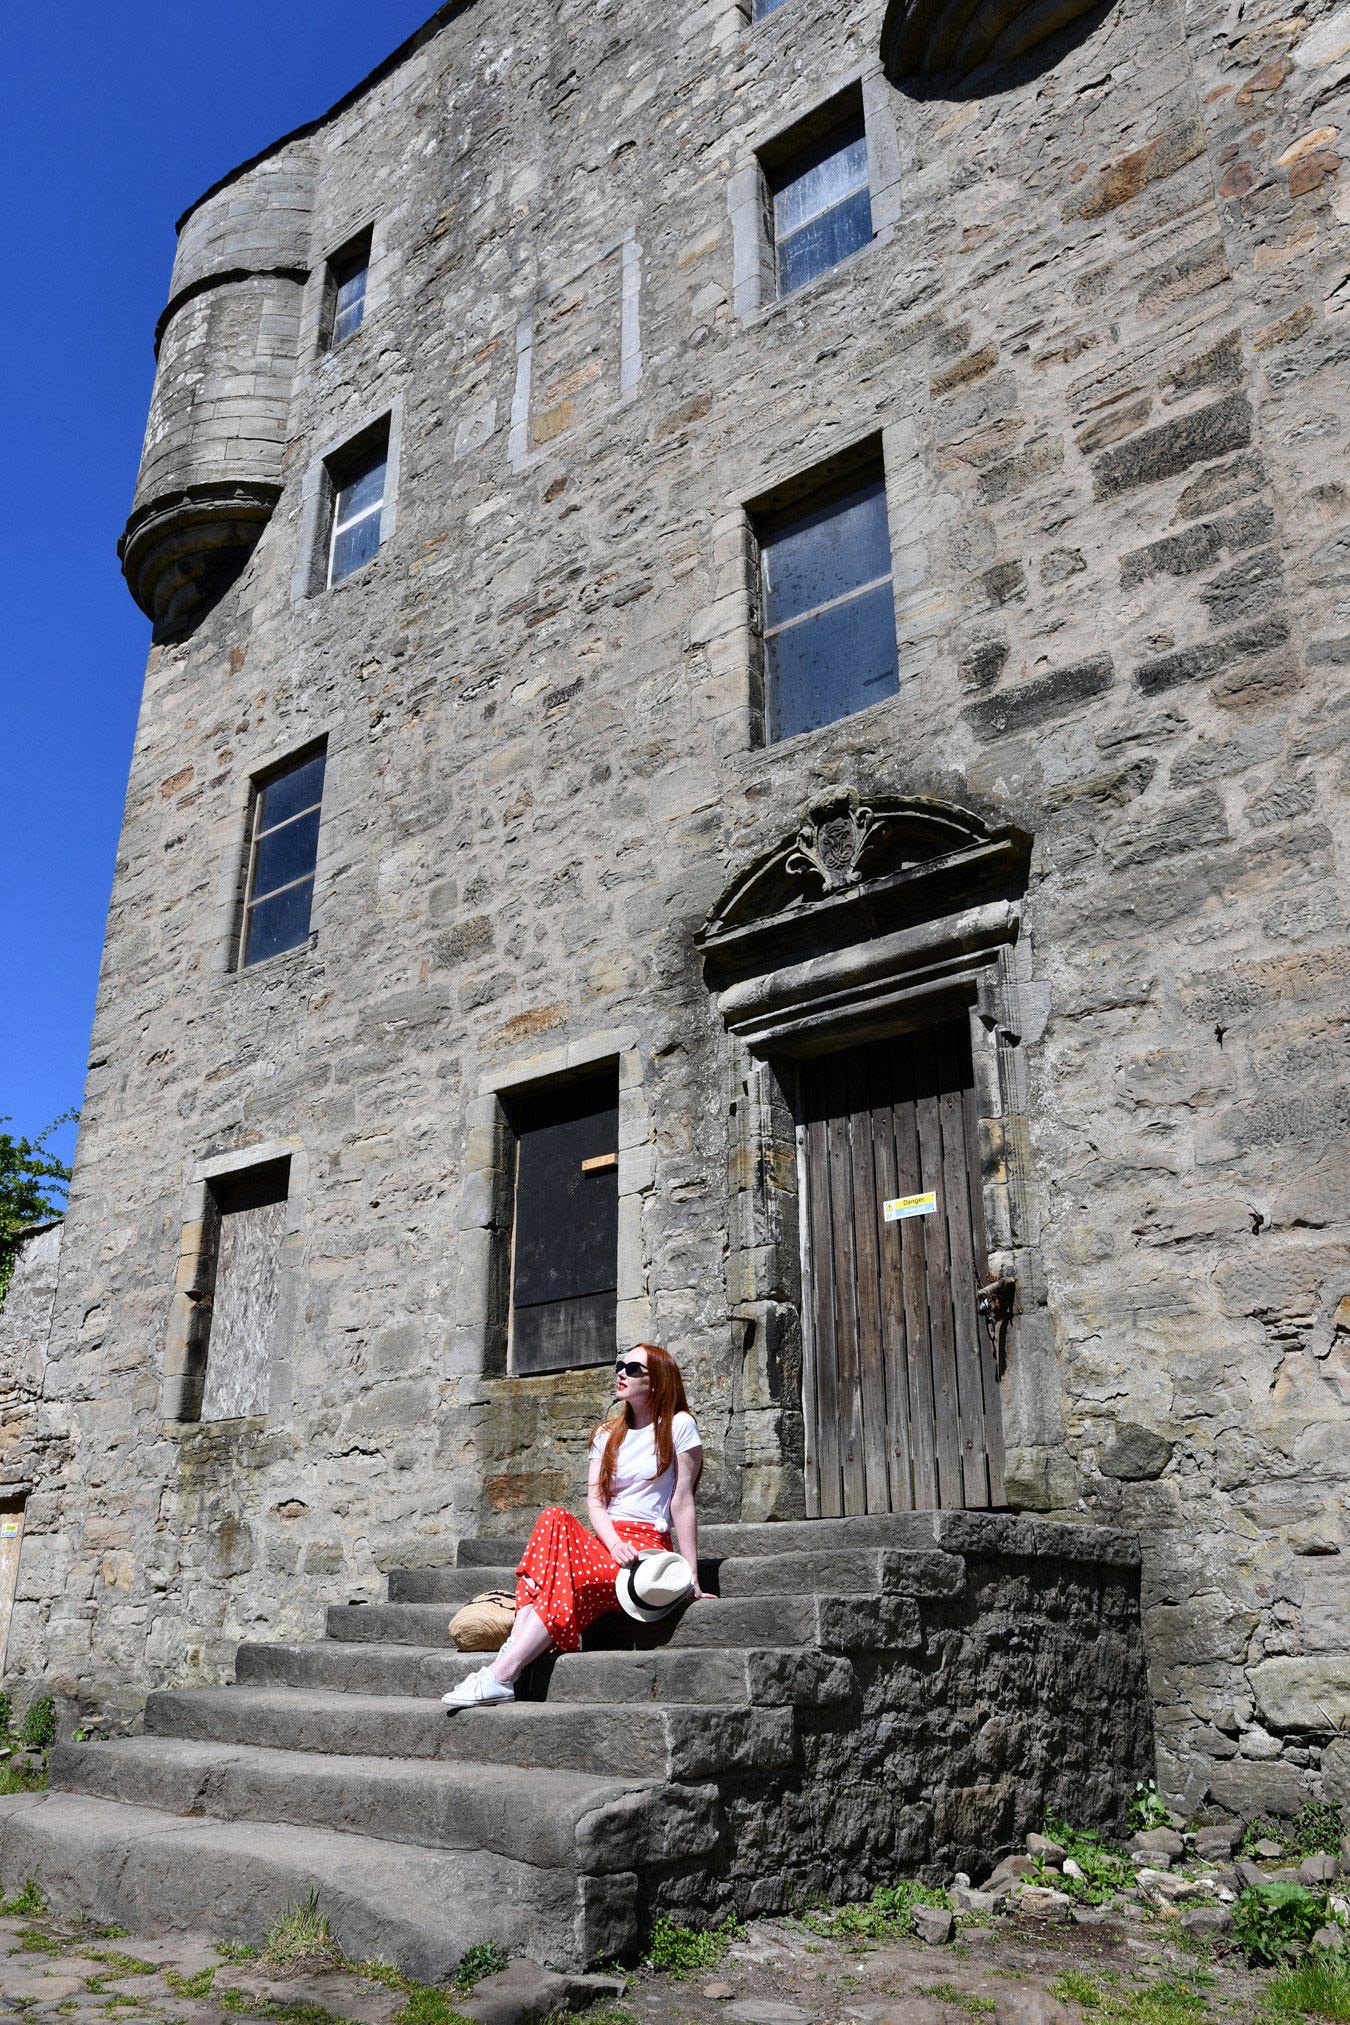 On the Steps at Lallybroch - a.k.a Midhope Castle - an Outlander filming location in Scotland